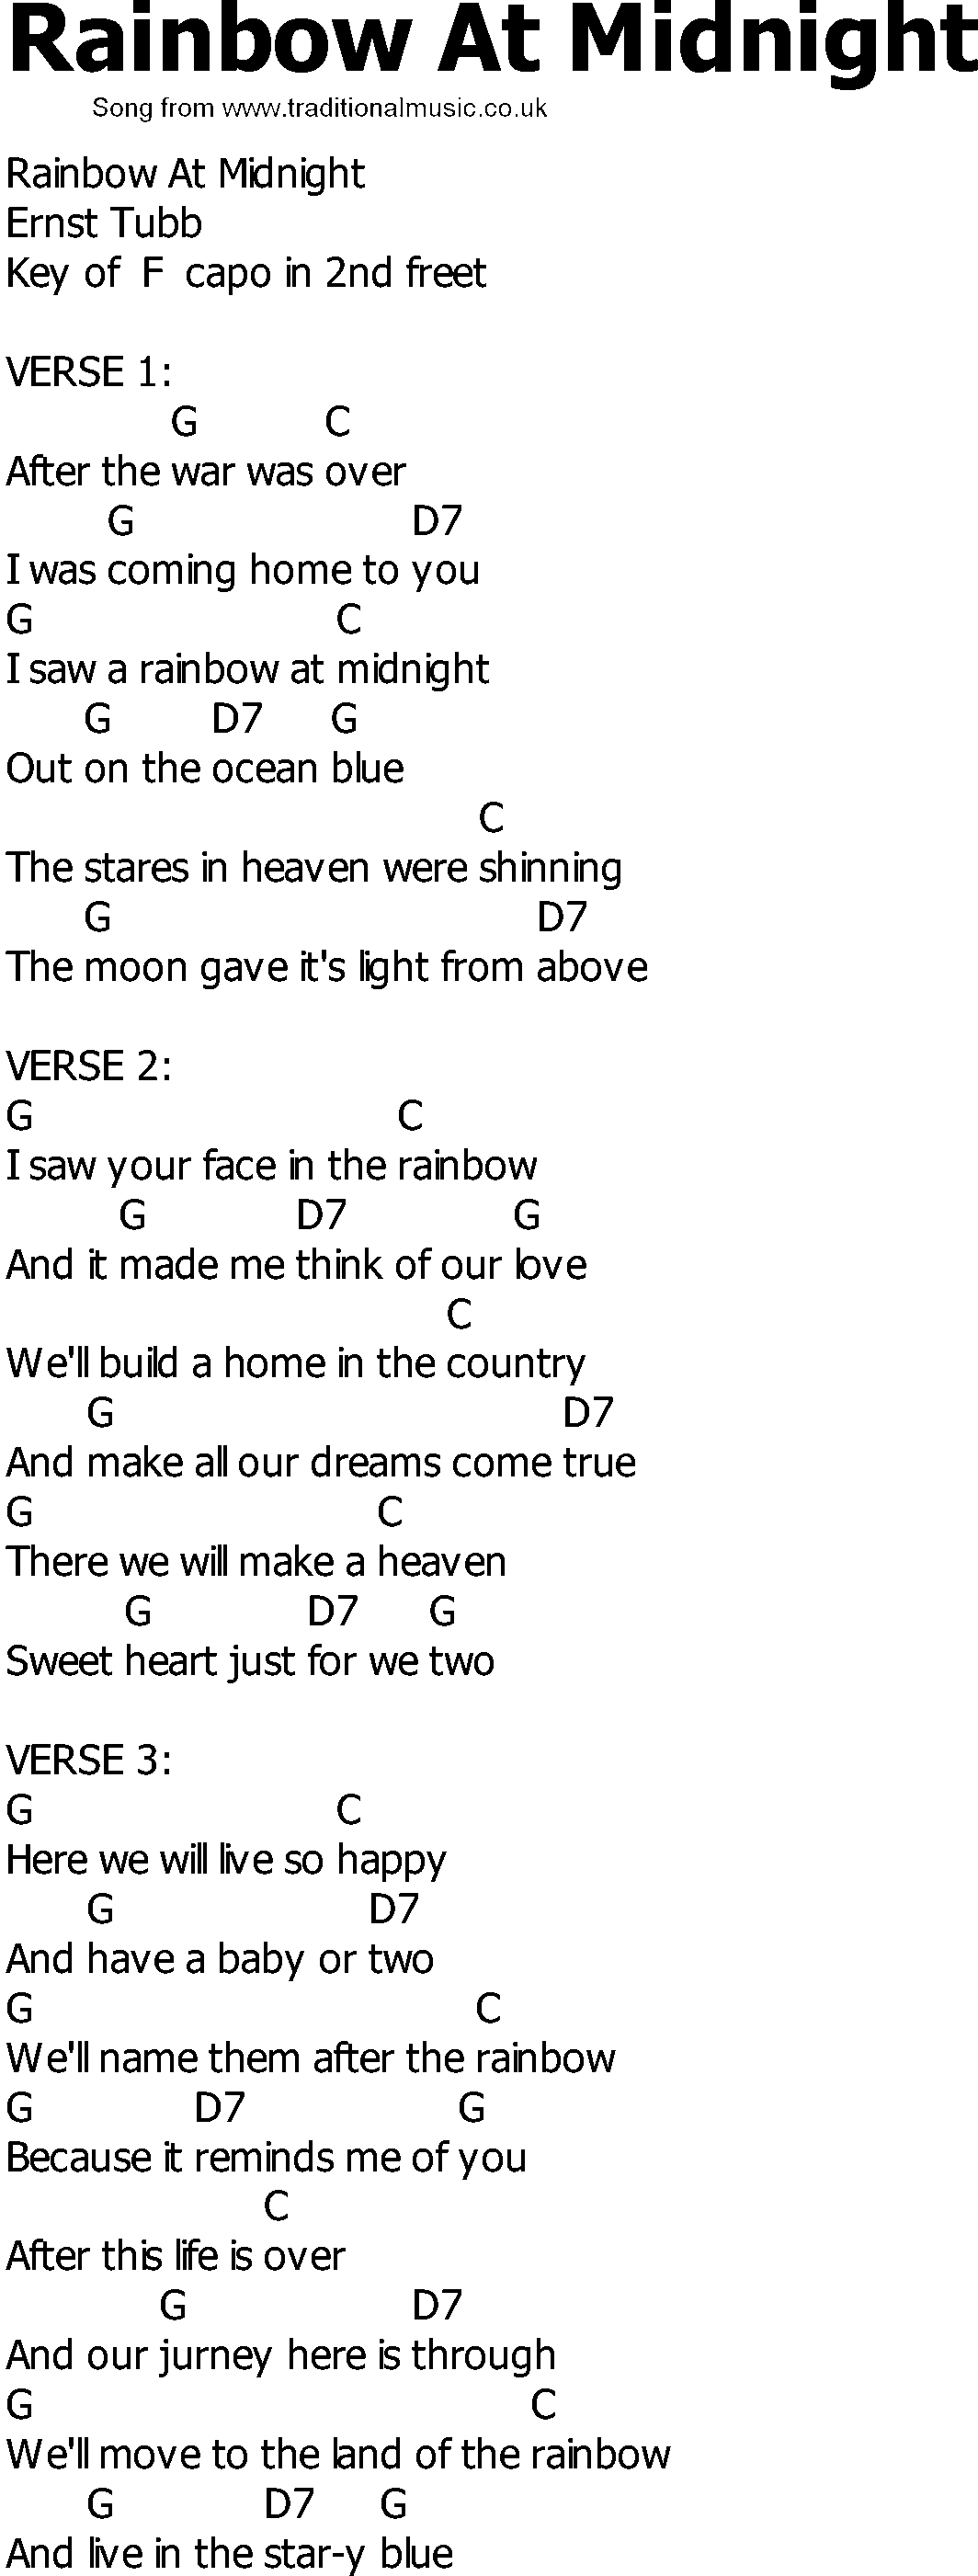 Old Country song lyrics with chords - Rainbow At Midnight